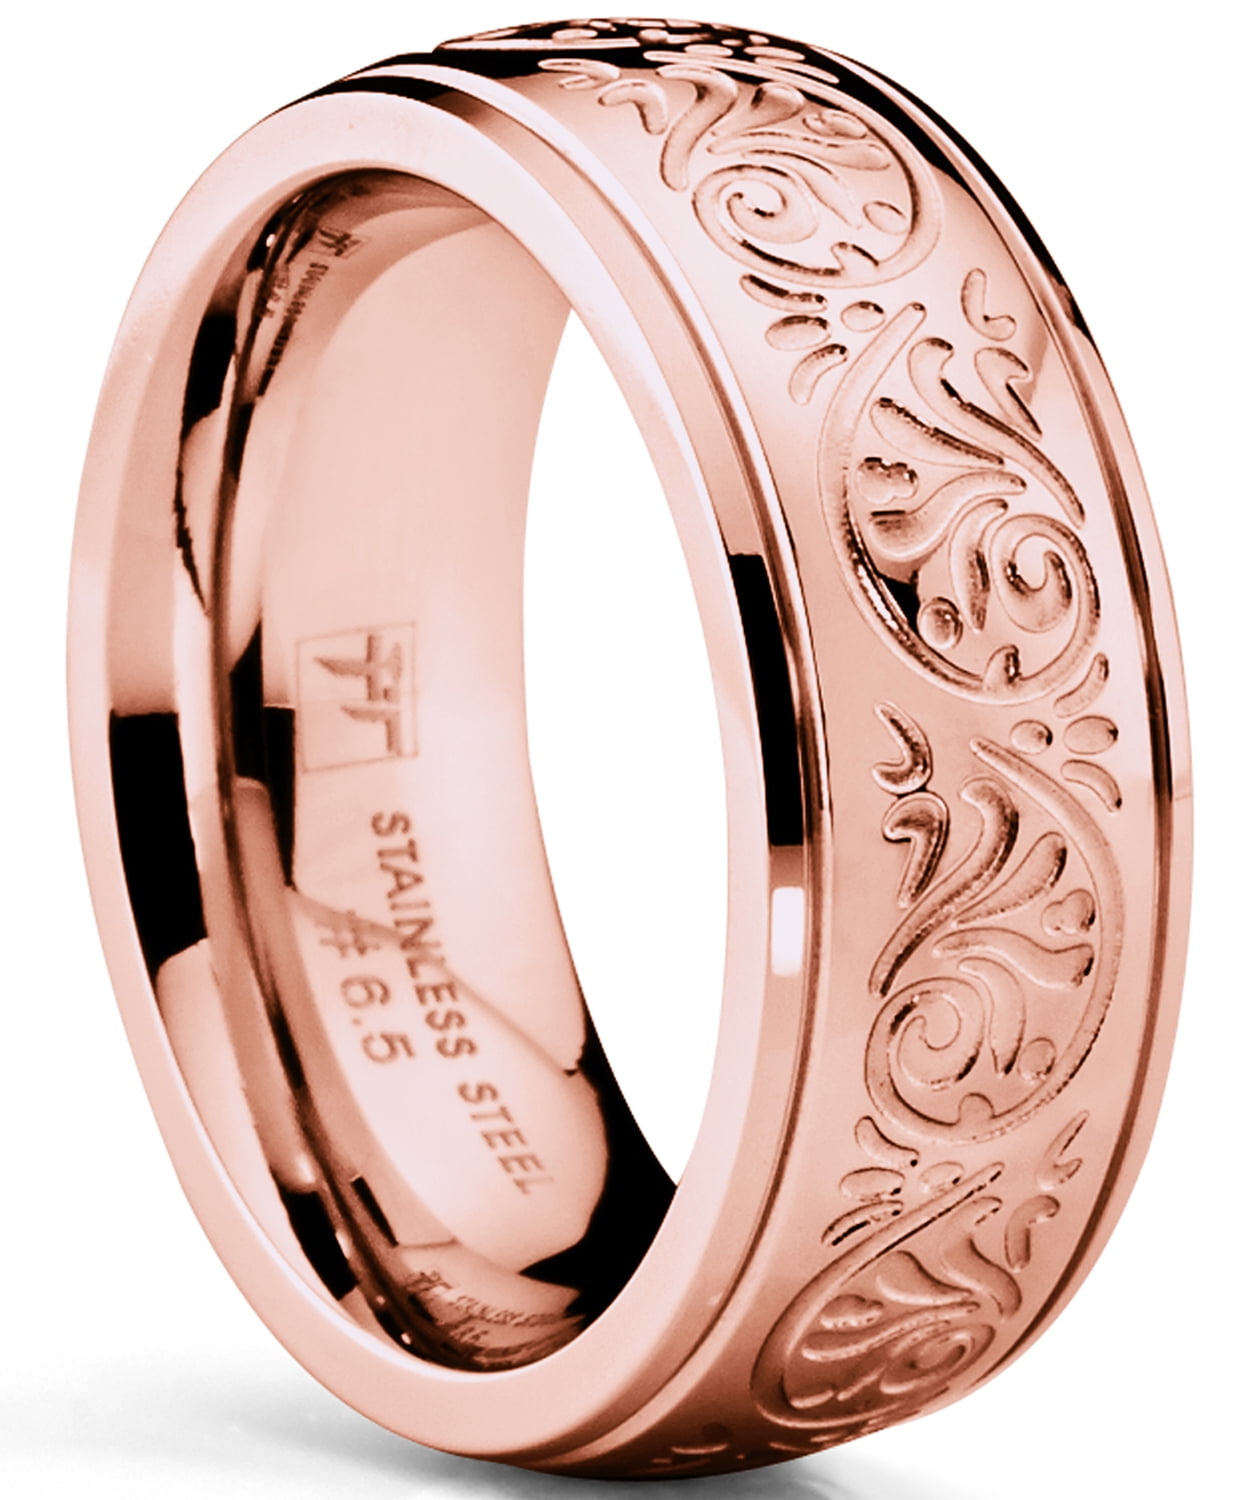 RingWright Co. - RoseTone Pink Women's Stainless Steel Ring Wedding Stainless Steel Womens Wedding Bands